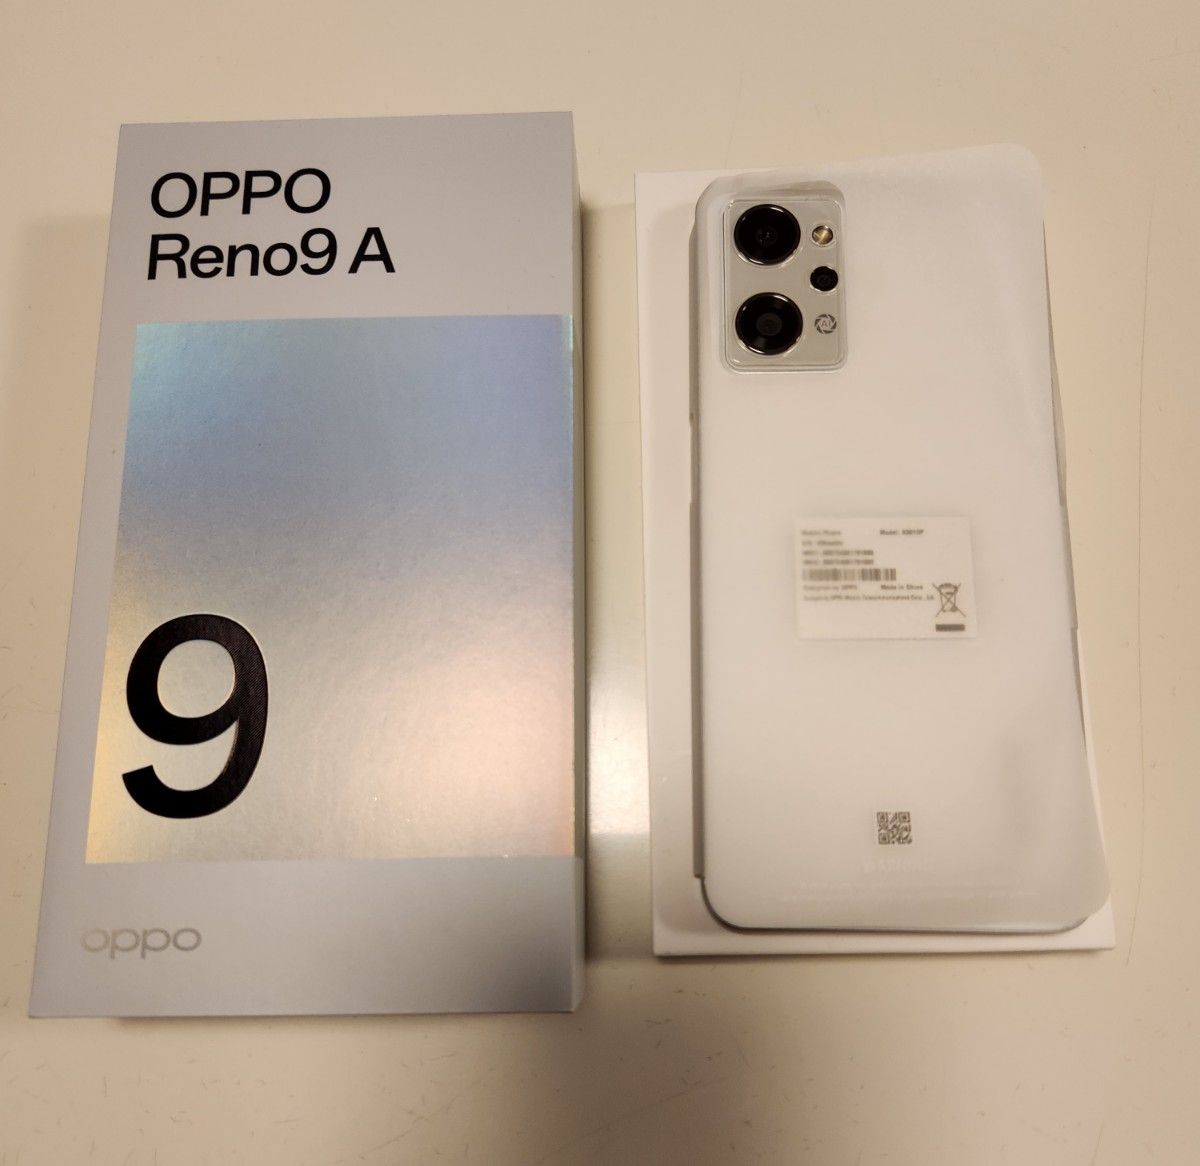 OPPO Reno9A A301OP ムーンホワイト Y mobile クリアケース付き｜Yahoo